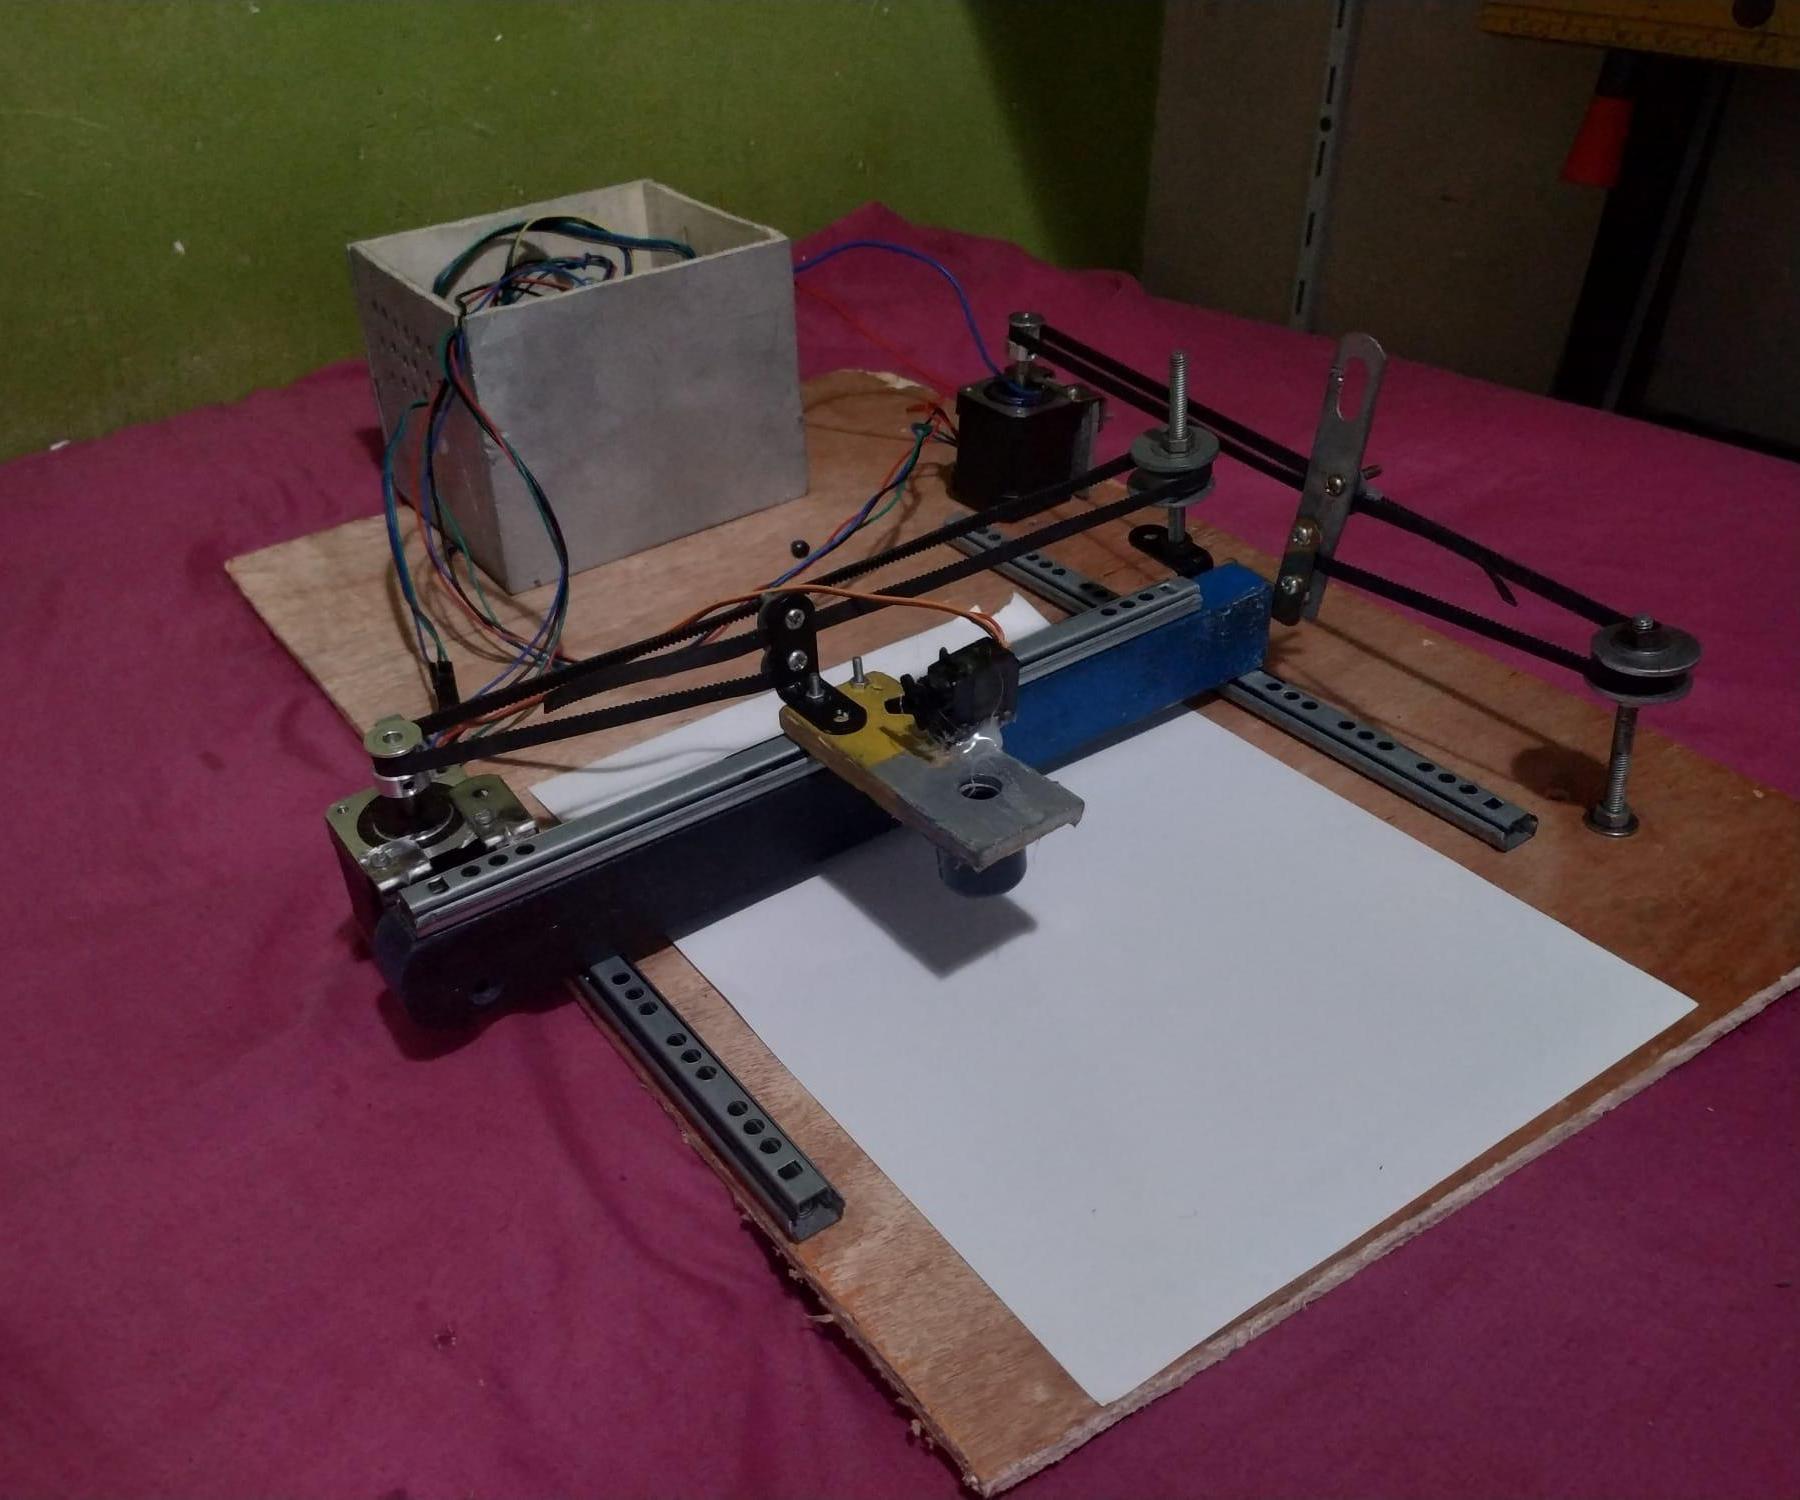 CNC Plotter Literally Out of Trash From a Sketch